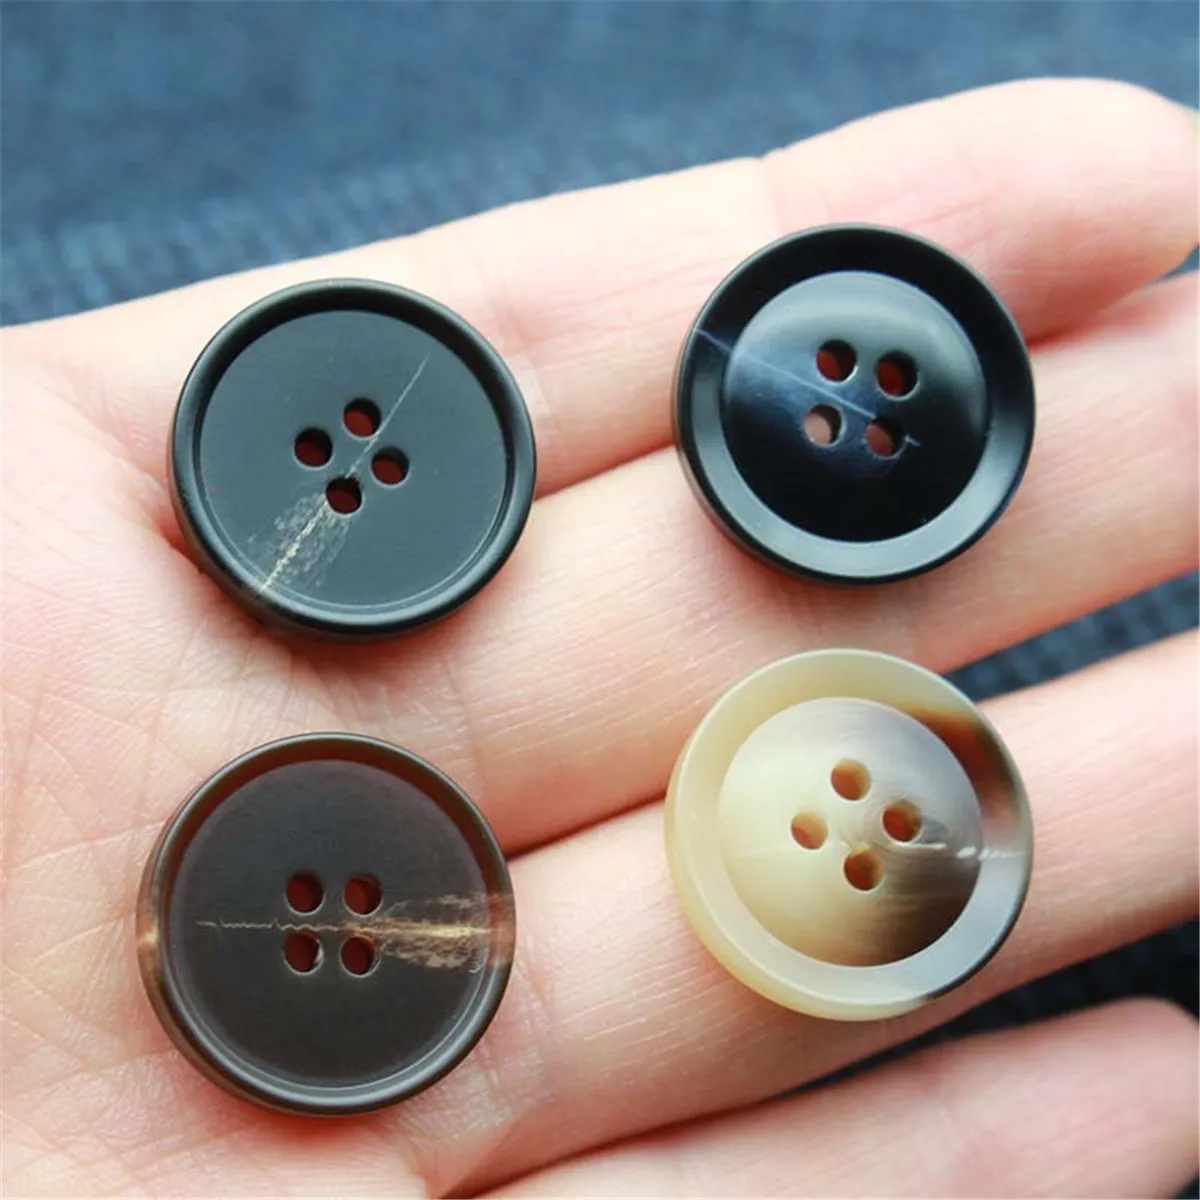 

100 Pcs 1inch(25/30MM) Sewing Resin Buttons Round Shape 4 Holes Craft Buttons Flatback Button for DIY Coats Clothes Accessories